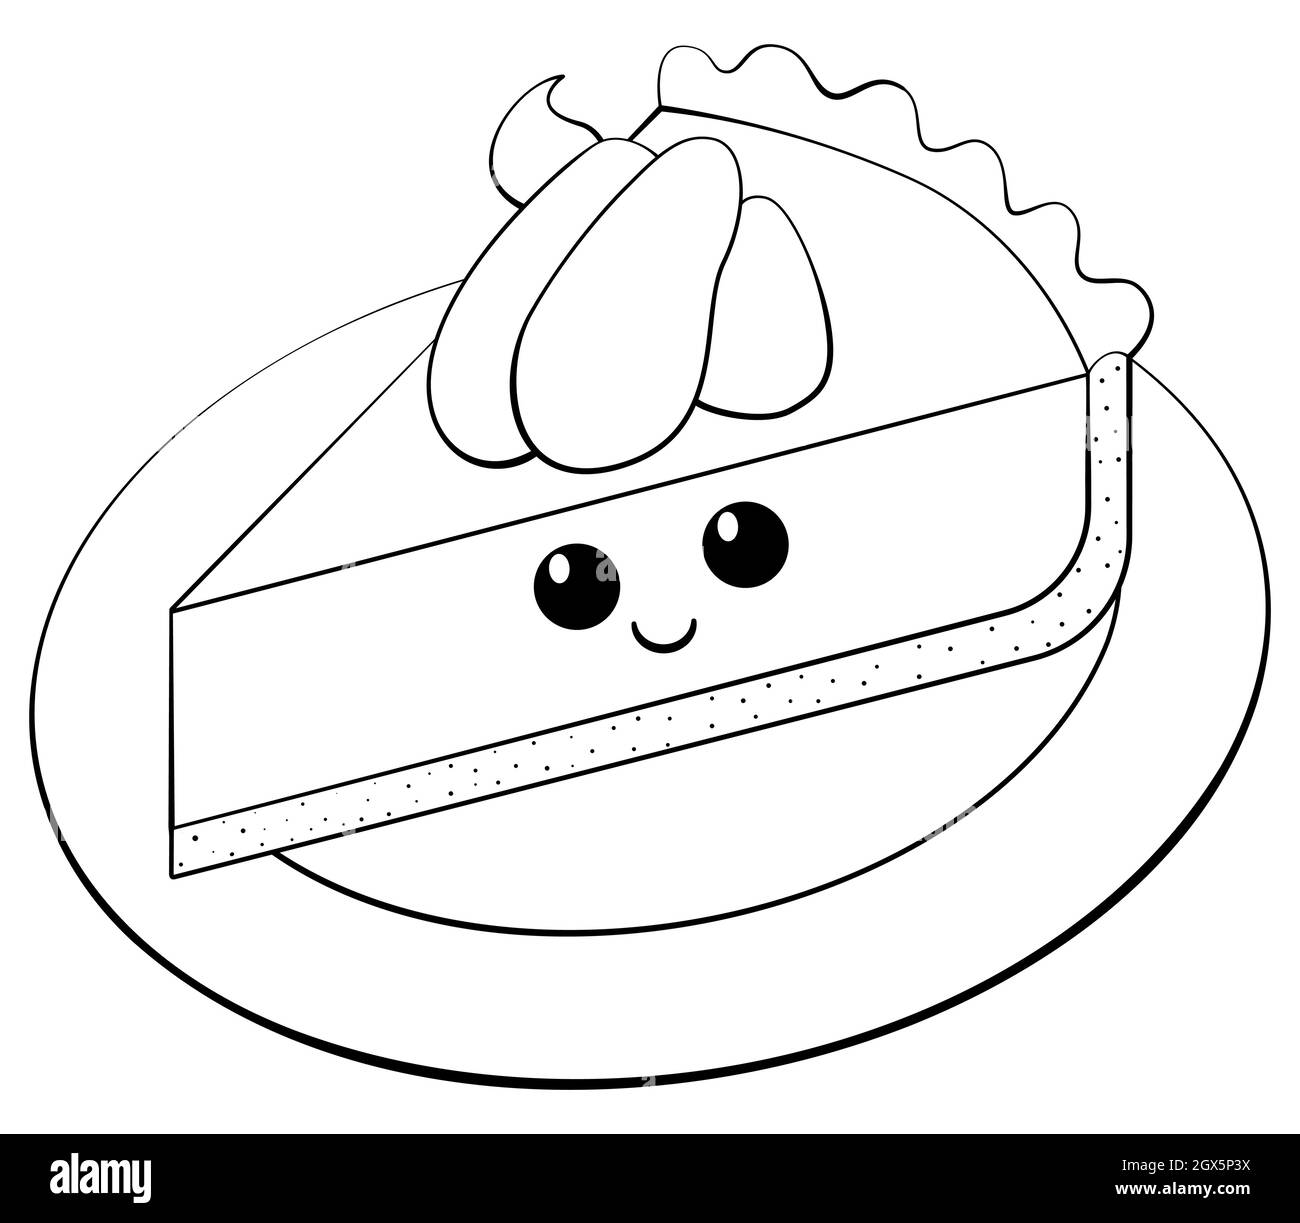 Pie slice illustration cut out stock images pictures